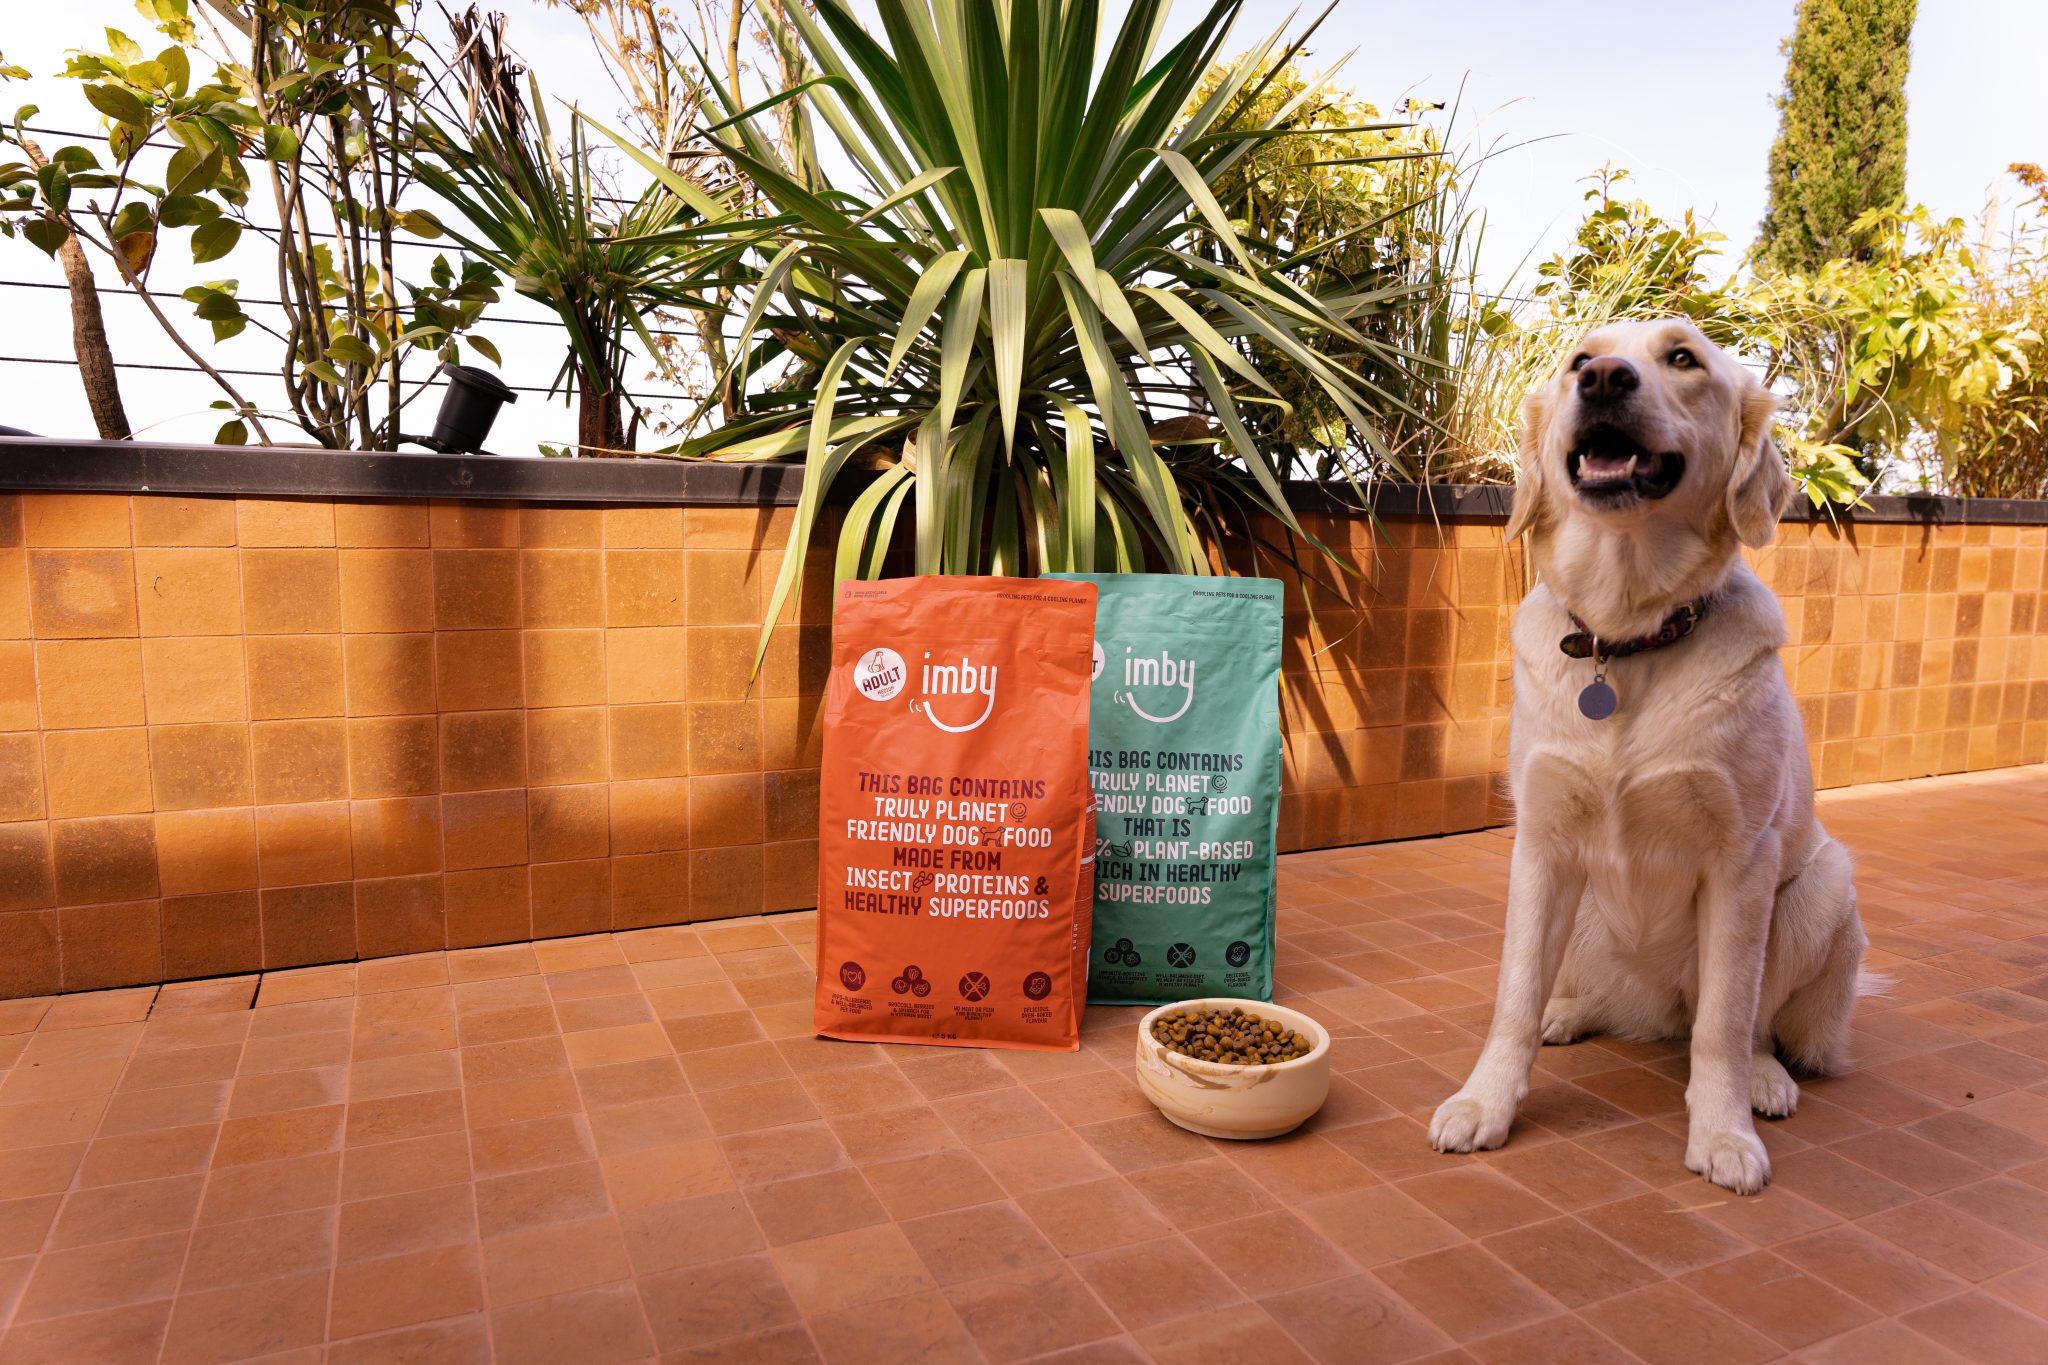 IMBY: NUTRITION THAT DELIGHTS YOUR PET & HEALS THE PLANET TURNING THE CONVENTIONAL PETFOOD INDUSTRY UPSIDE DOWN